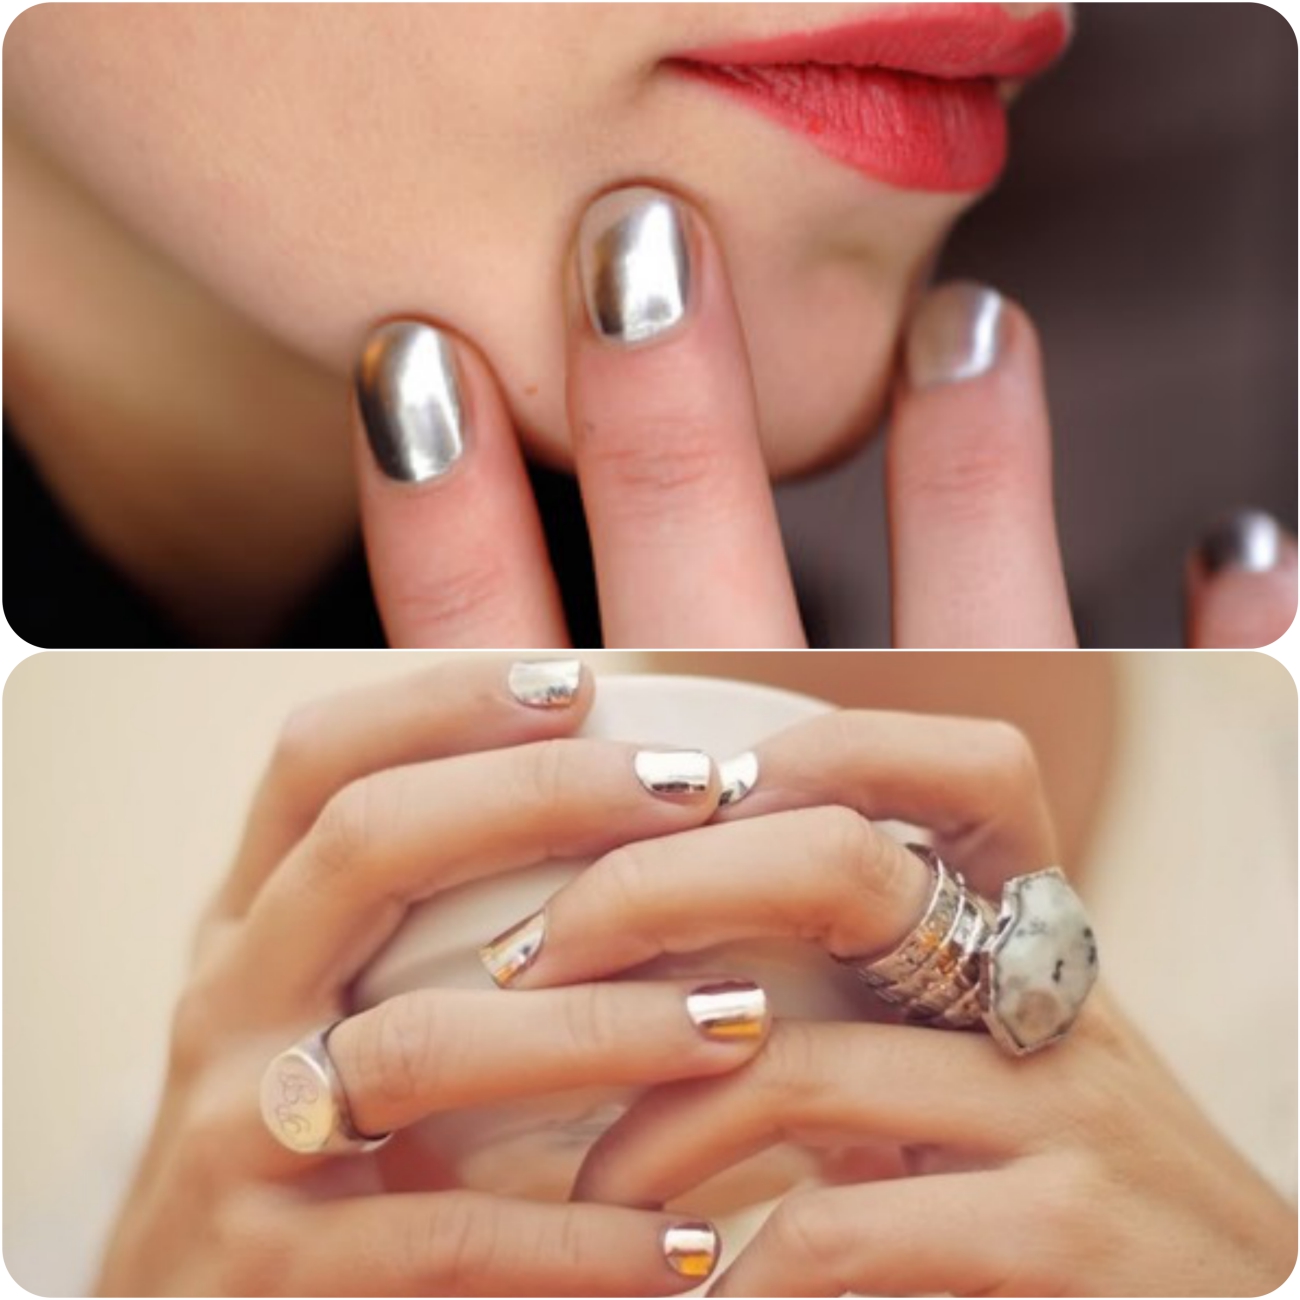 Best Dazzling Reflecting Nail Art Designs For Girls....styloplanet (3)